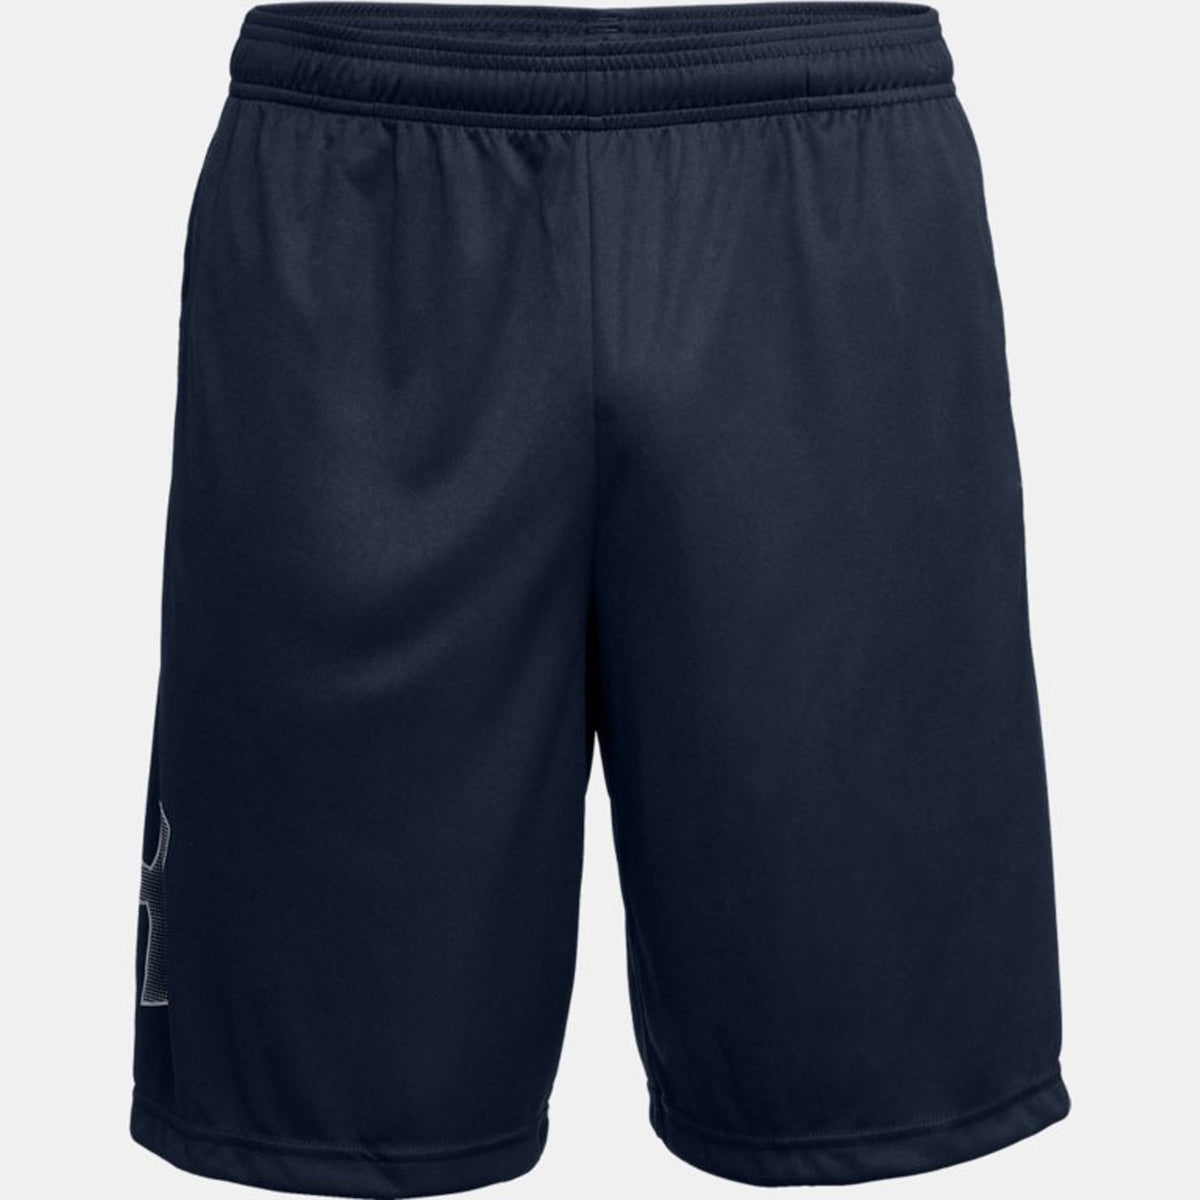 Under Armour Mens Tech Graphic Shorts: Academy/Steel